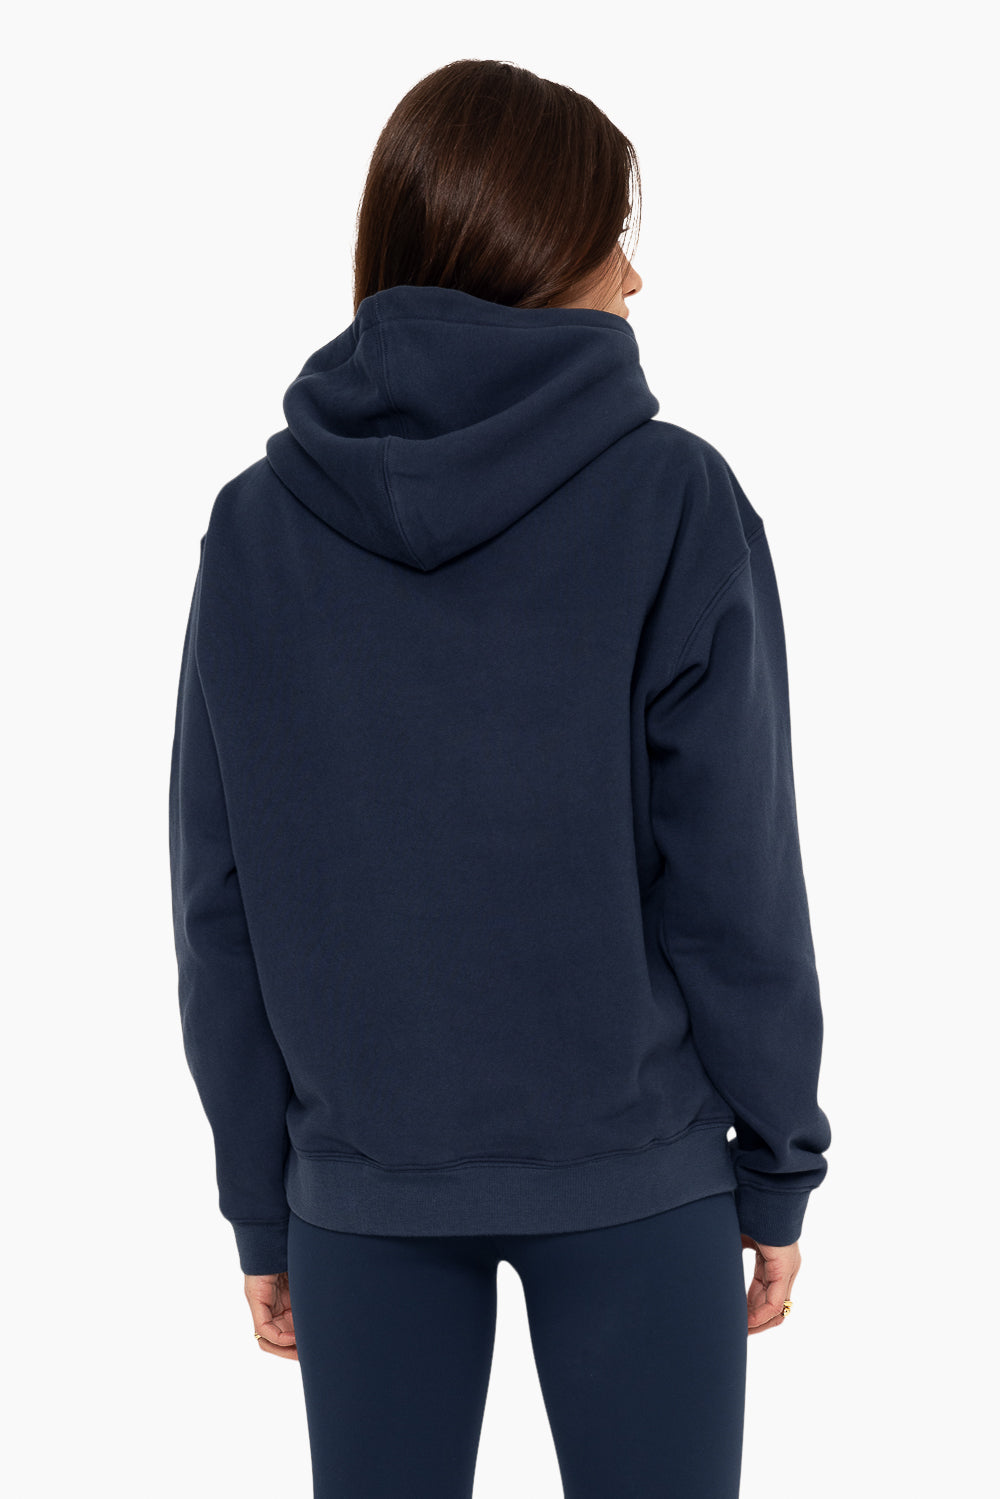 SET™ EMBROIDERED HEAVYWEIGHT SWEATS HOODIE IN OXFORD